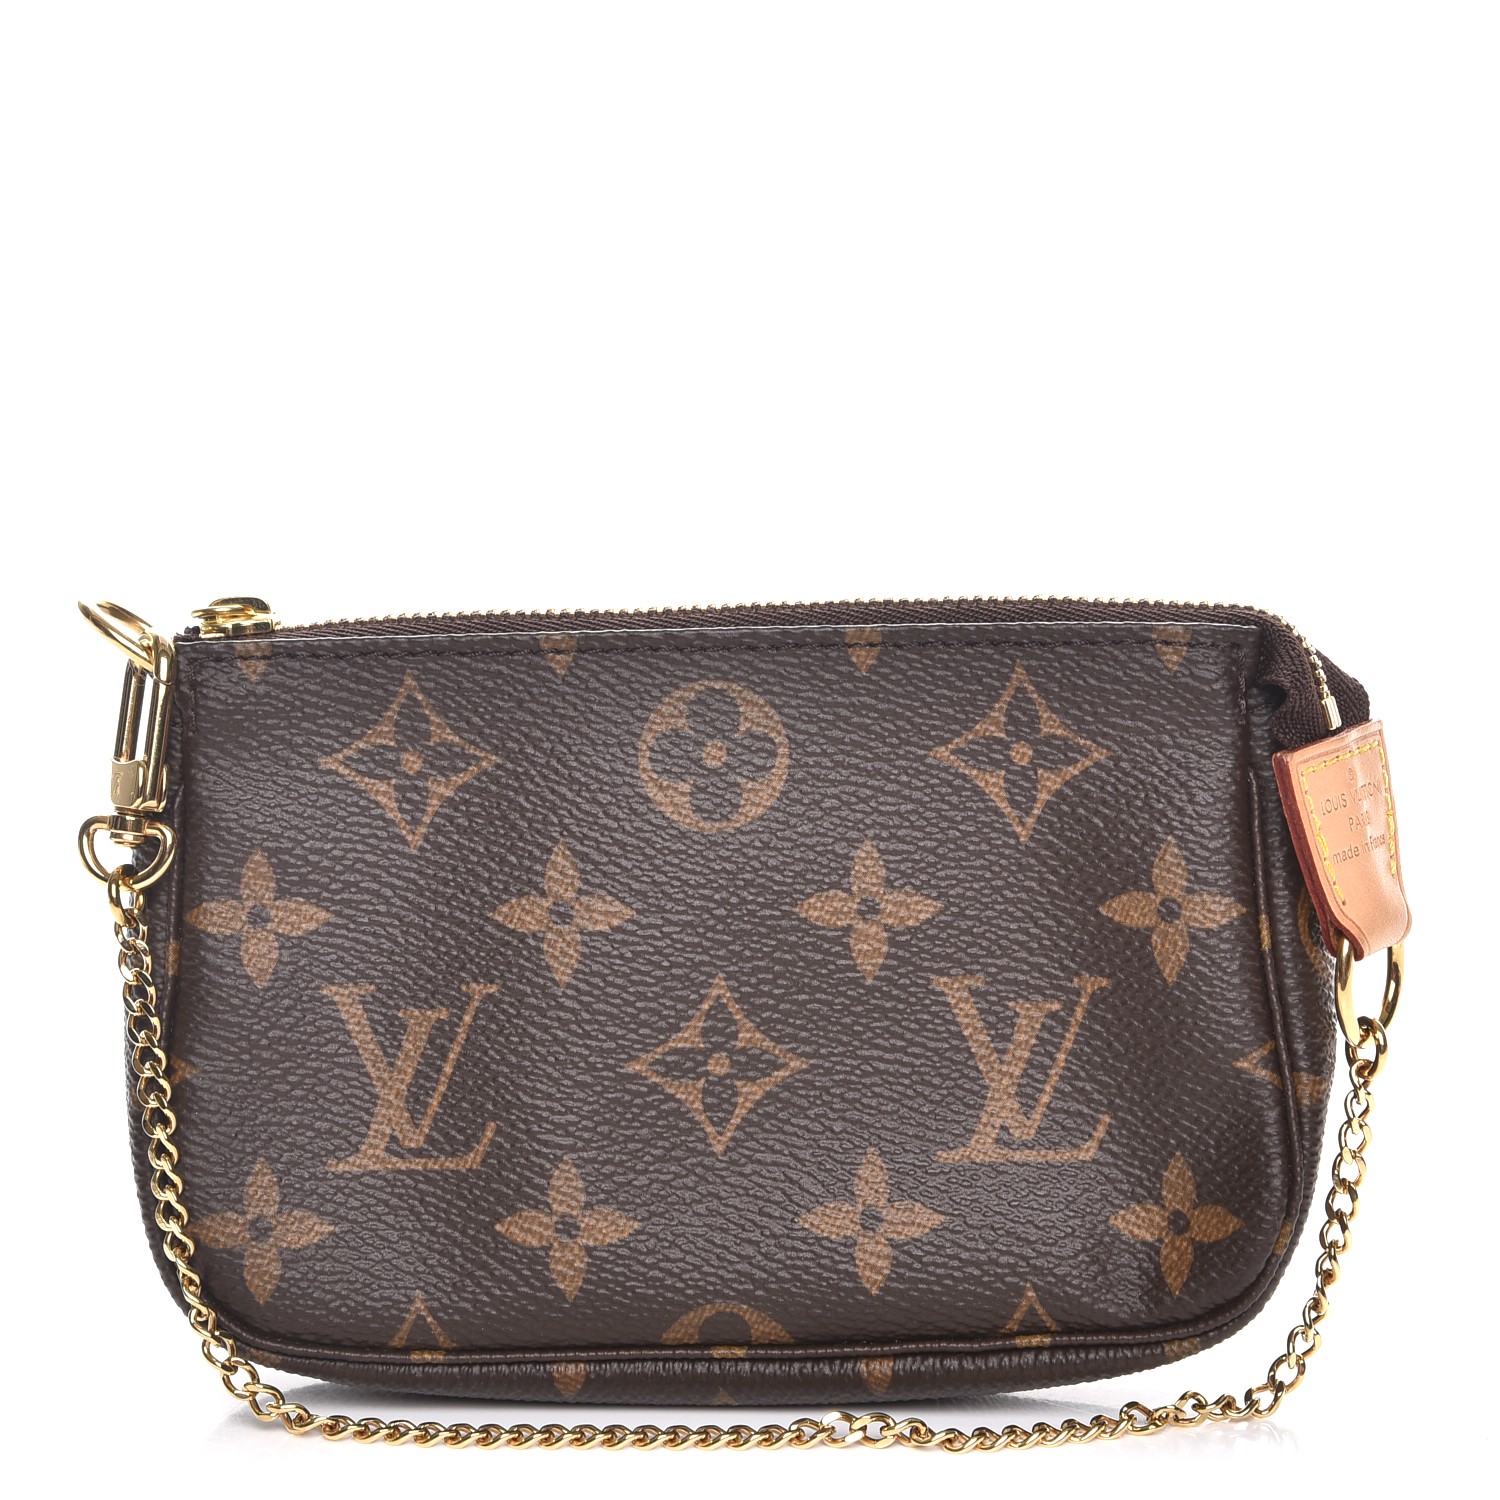 Louis Vuitton Small leather goods 297178